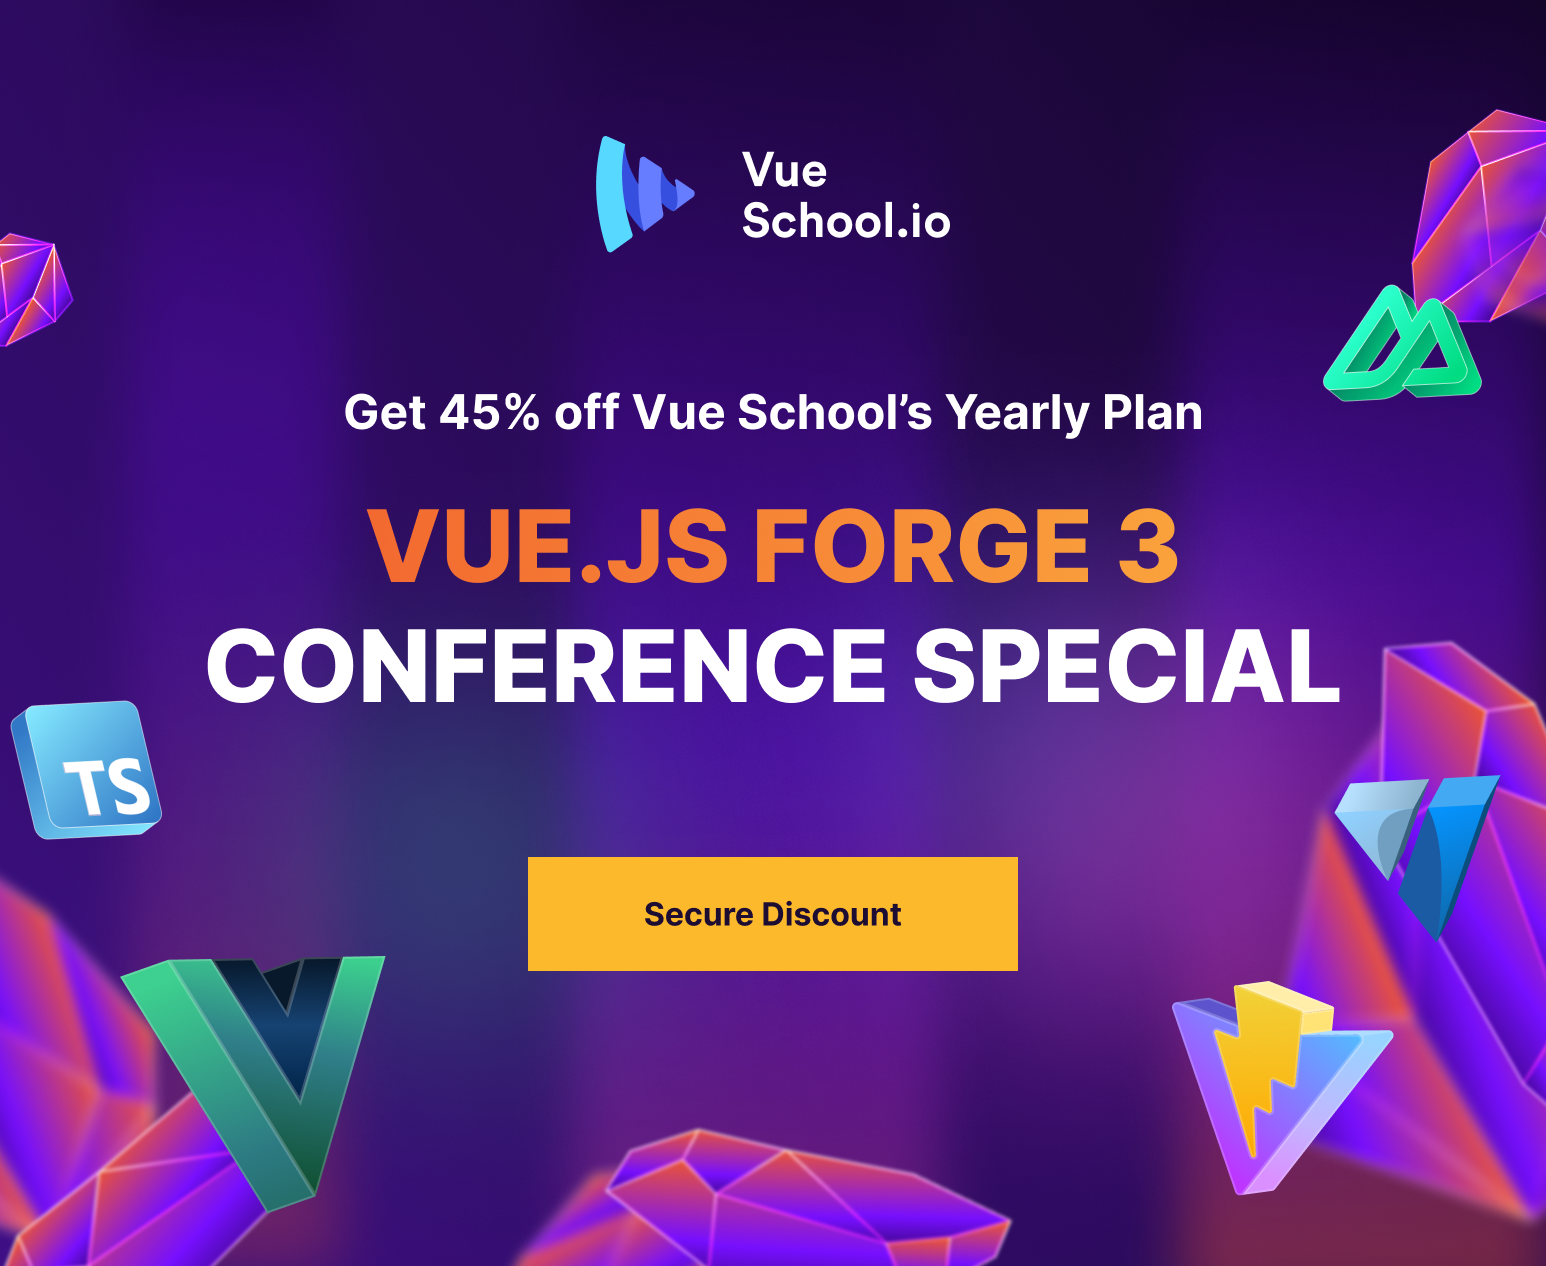 Get 45% OFF a Yearly Vue School Plan